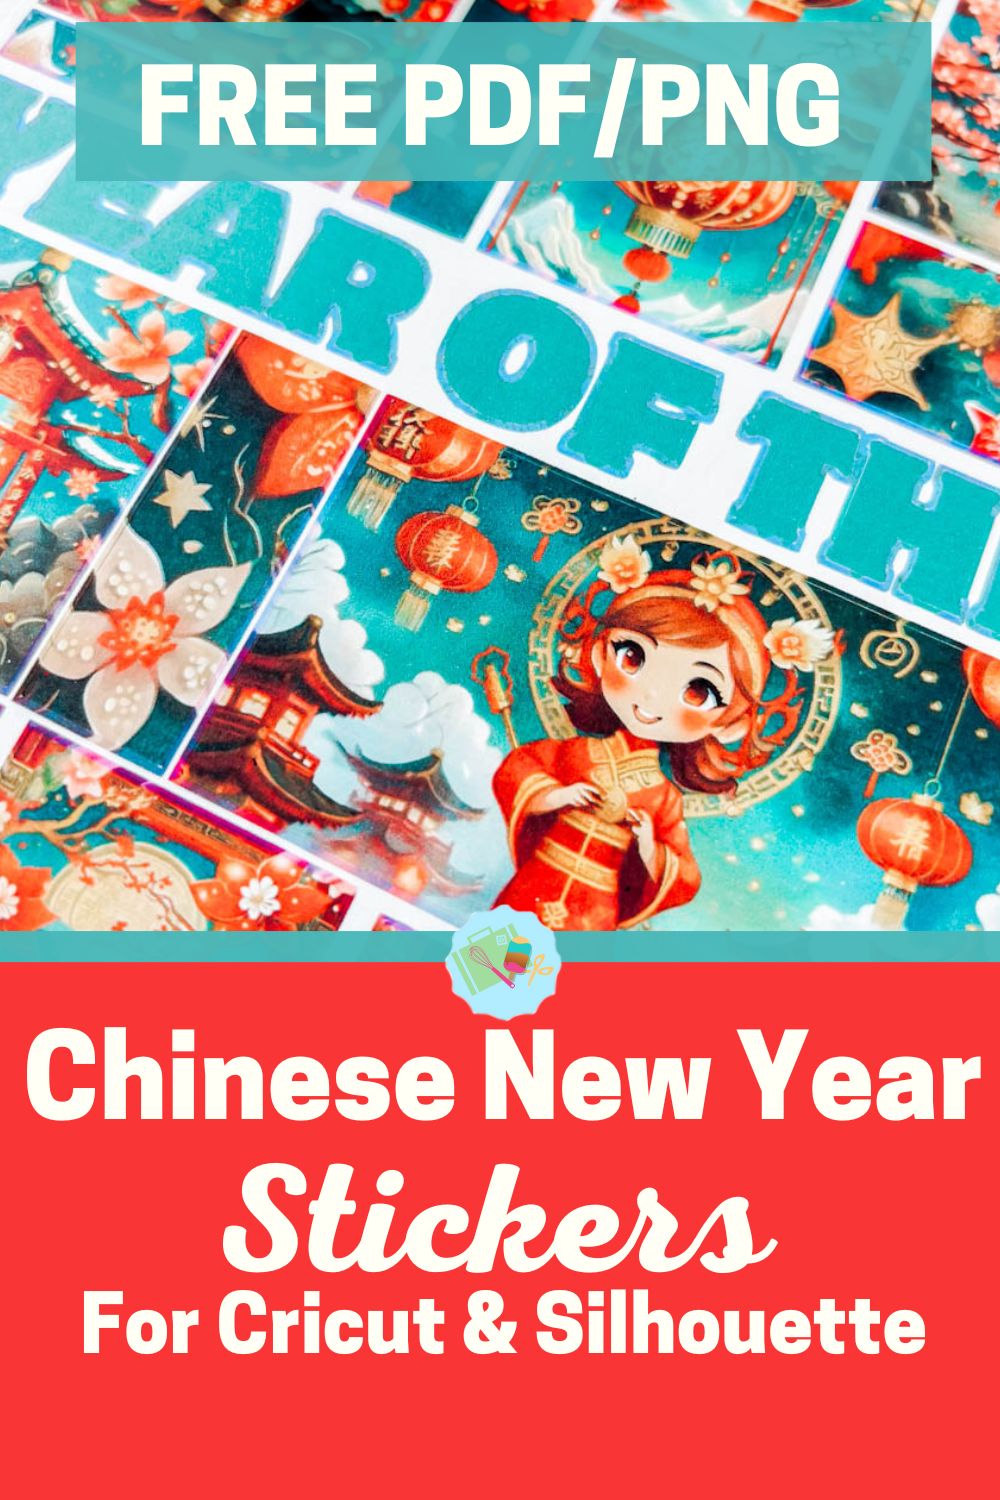 Free PDF PNG Chinese New Year, Year of the Dragon printable Stickers for Cricut